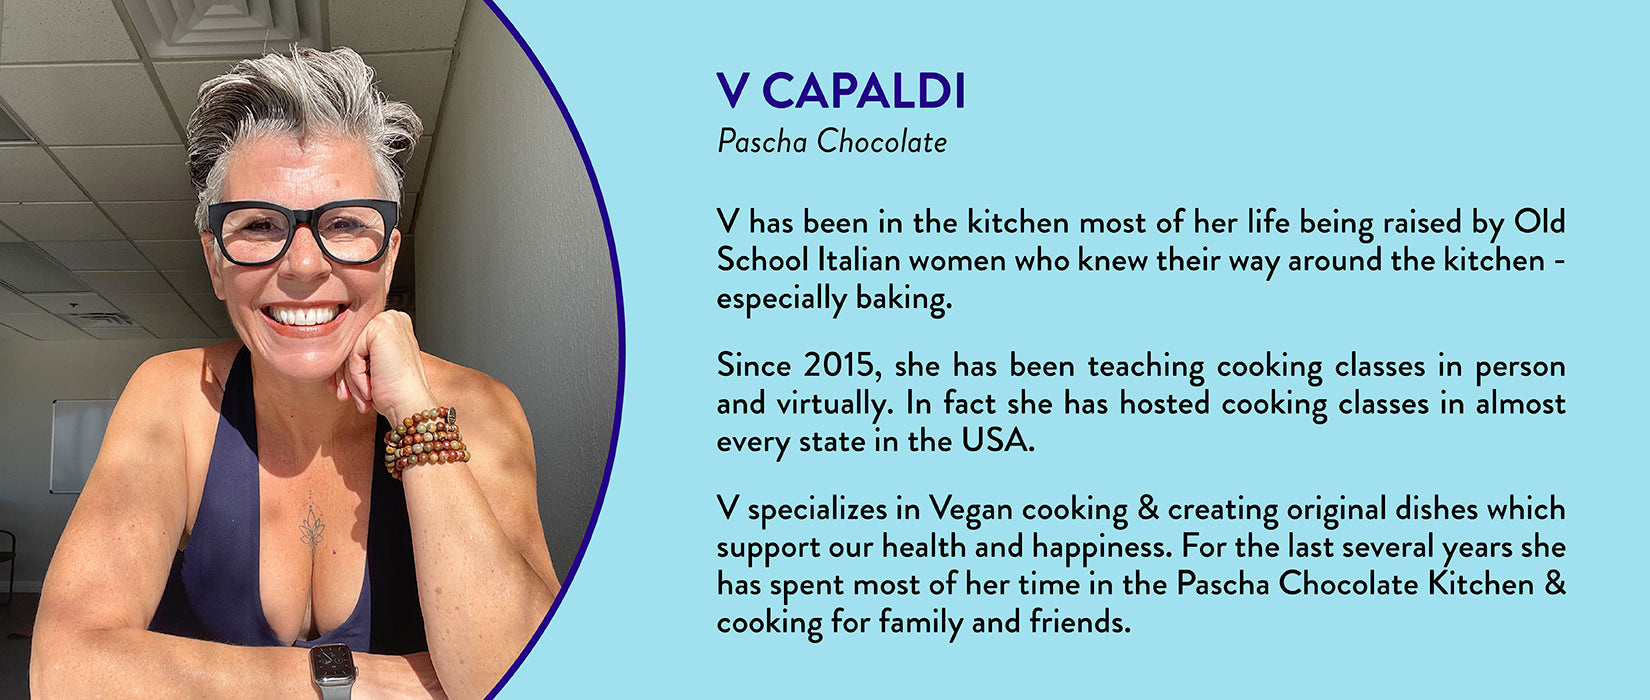 V Capaldi, Pascha Chocolate - V has been in the kitchen most of her life being raised by Old School Italian women who knew their way around the kitchen - especially baking. Since 2015, she has been teaching cooking classes in person and virtually. In fact she has hosted cooking classes in almost every state in the USA. V specializes in Vegan cooking & creating original dishes which support our health and happiness. For the last several years she has spent most of her time in the Pascha Chocolate Kitchen & cooking for family and friends.